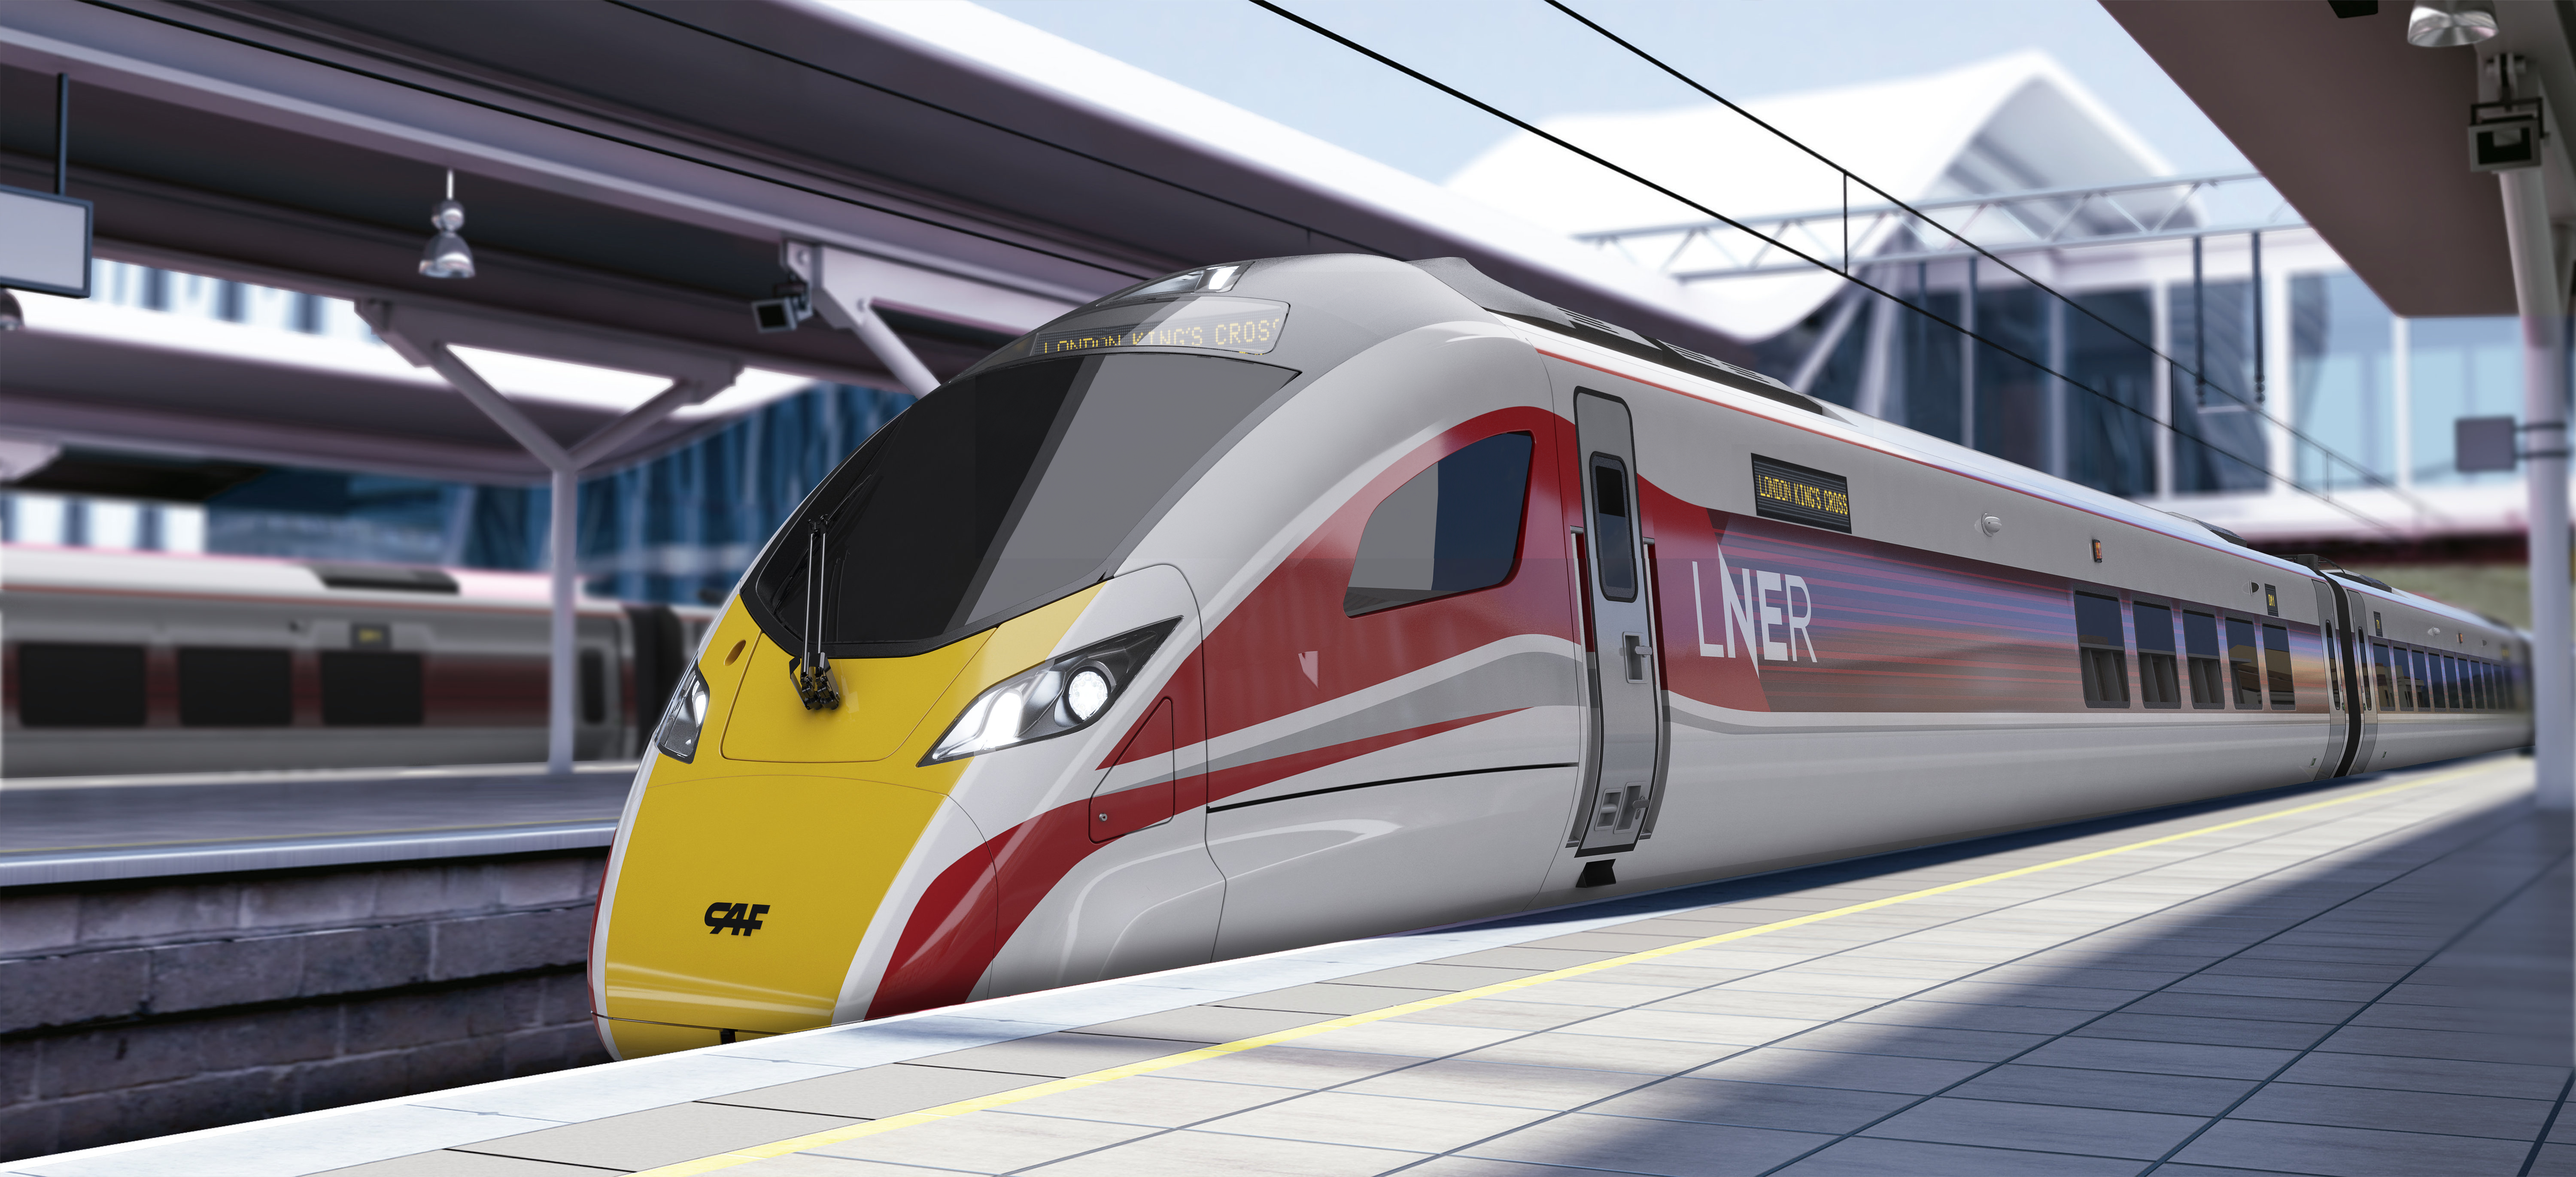 First Tri-Mode Long Distance Trains For The East Coast Main Line